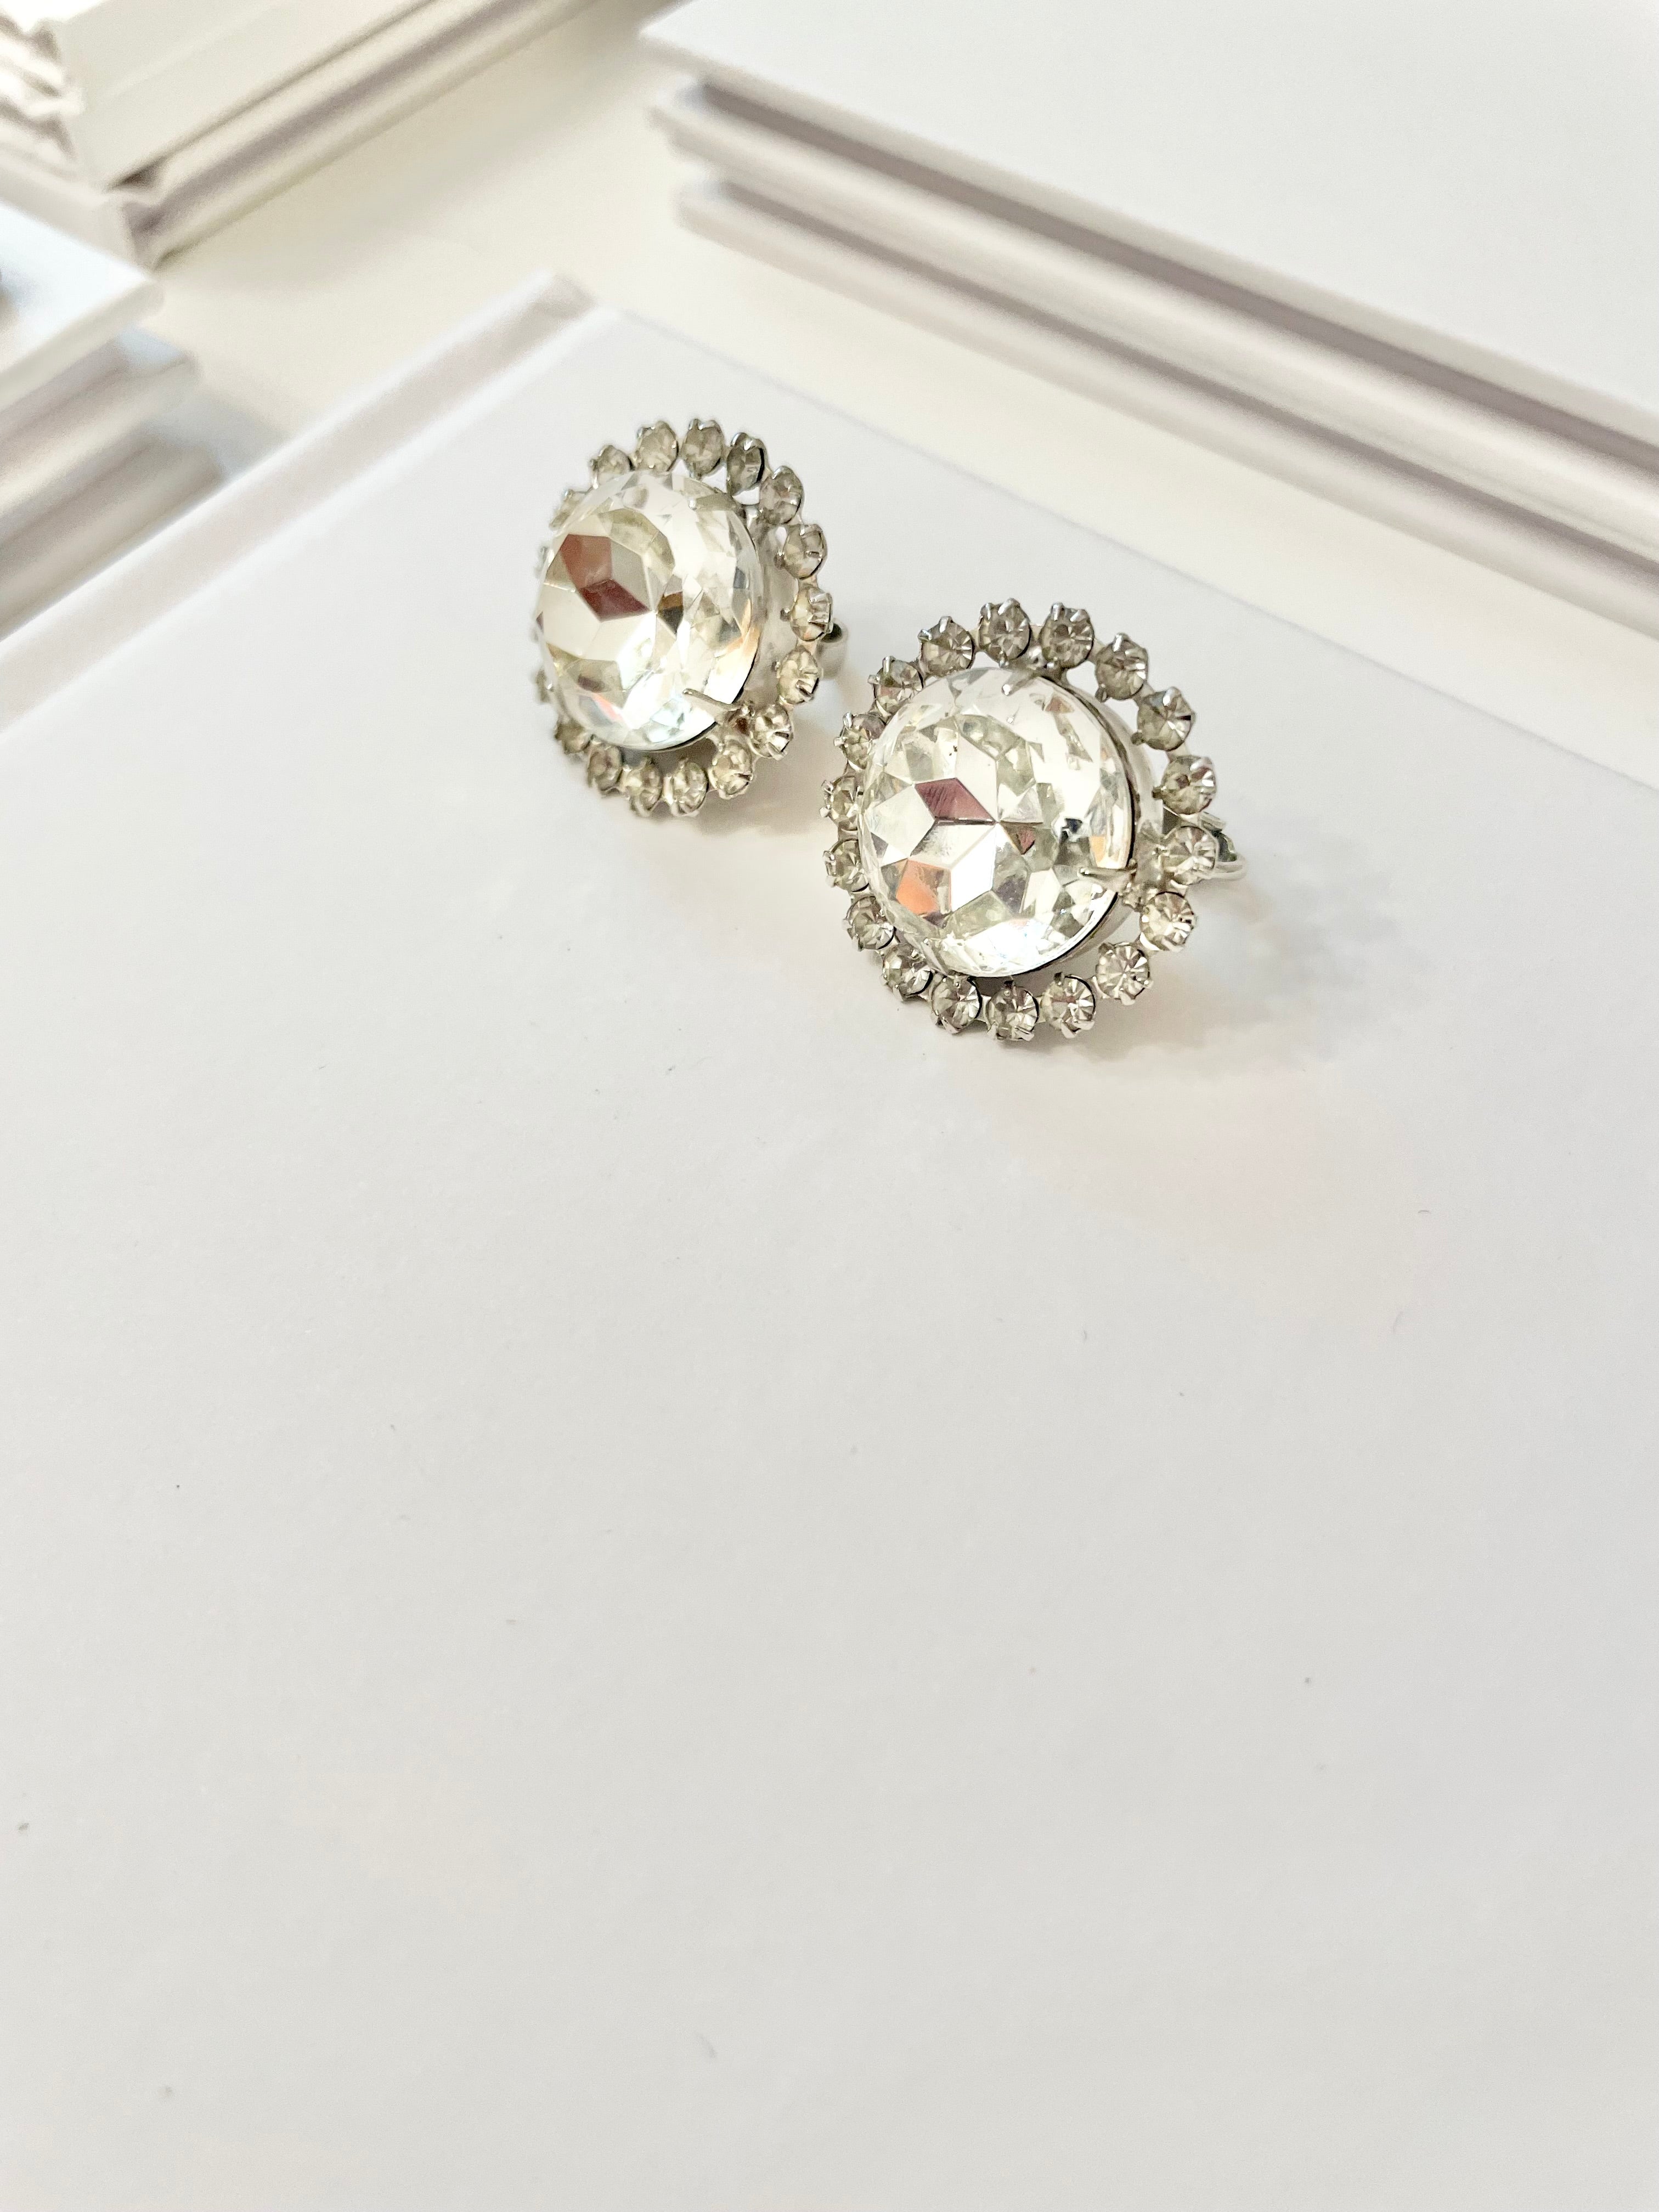 The heiress and her love of the brilliant cut diamond! These 1960's stunners are a must for any lady!!